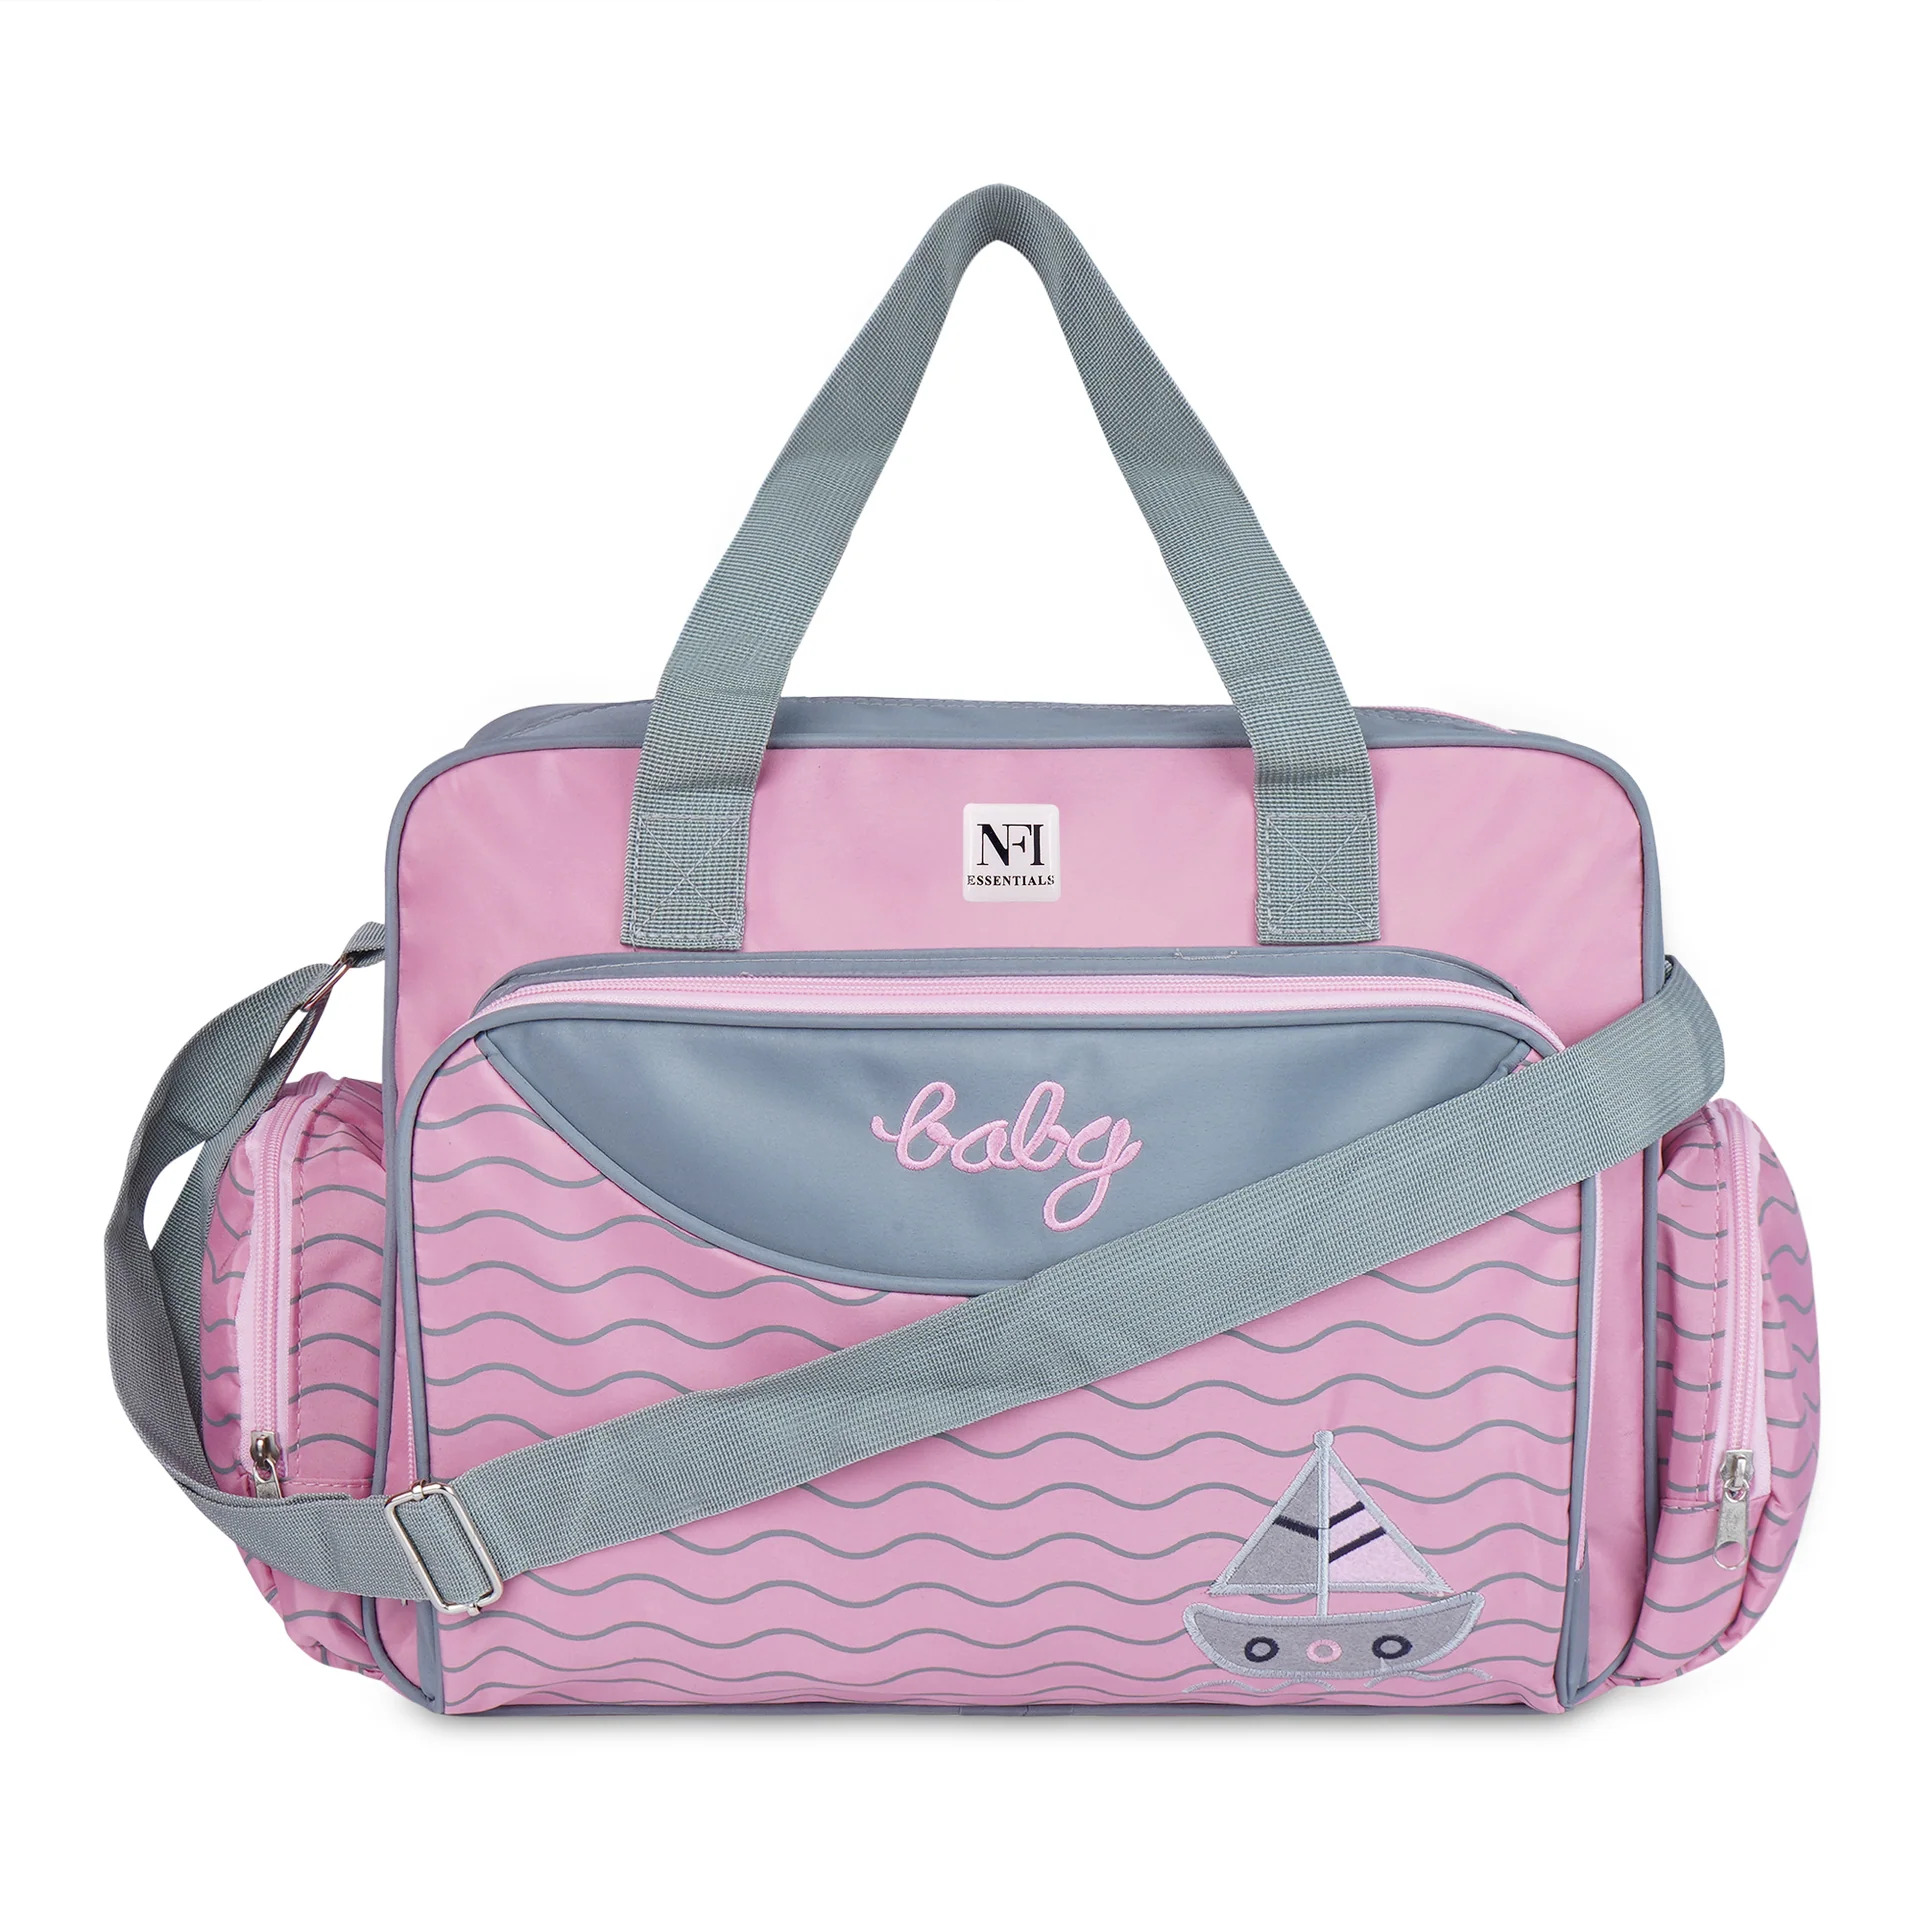 Baby Diaper Changing Mother Bag